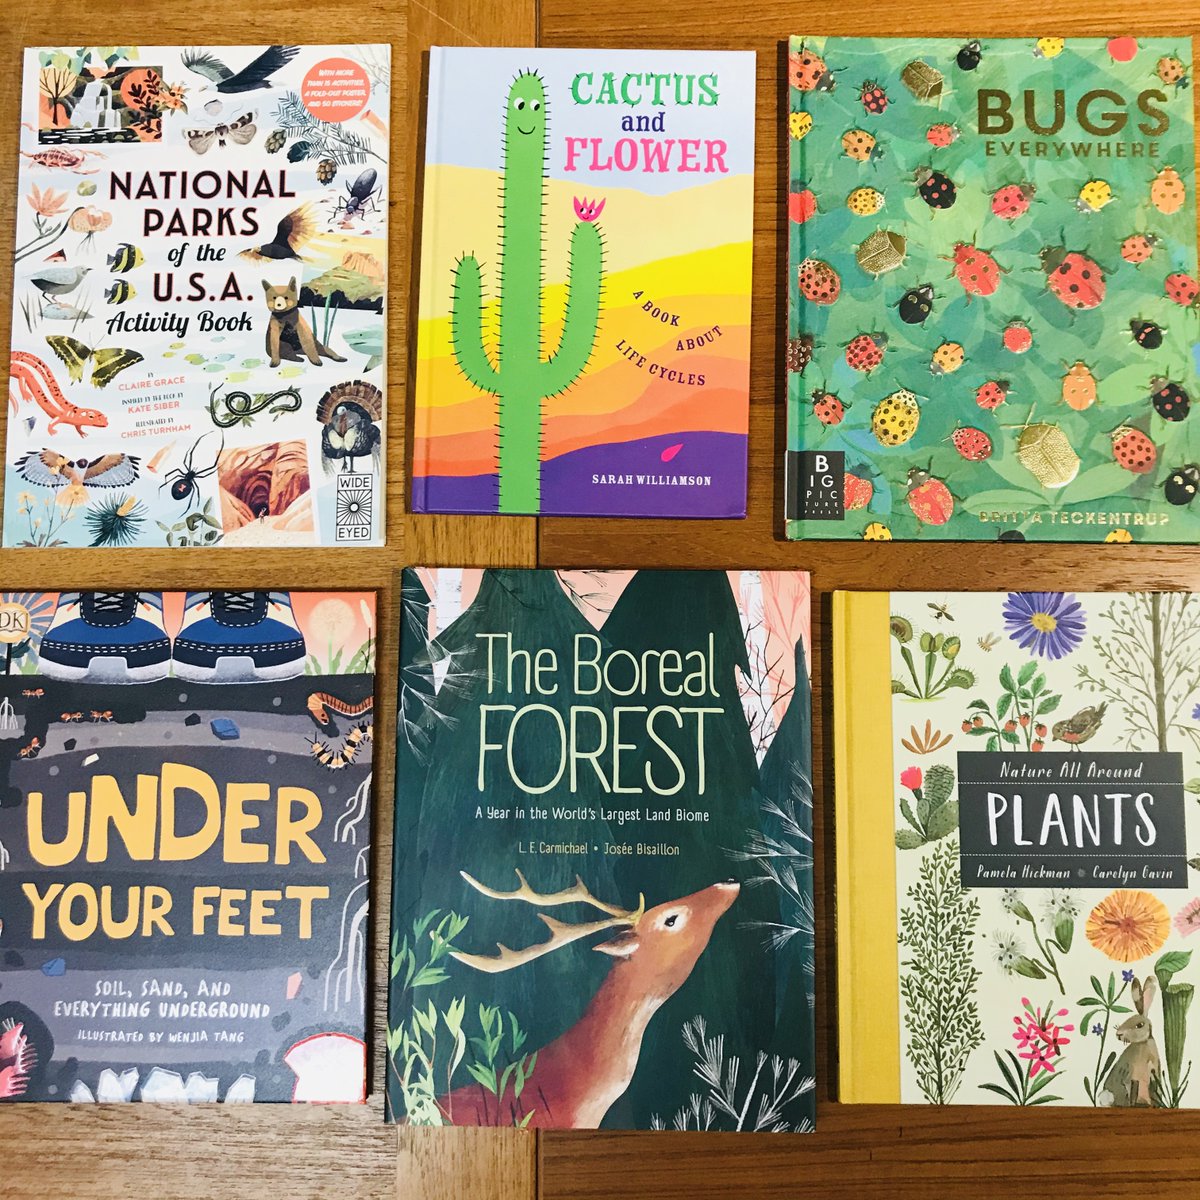 NATIONAL PARKS OF THE USA ACTIVITY BOOK by Claire Grace, illus Chris Turnham!UNDER YOUR FEET illus by Wenjia Tang!CACTUS & FLOWER by Sarah Williamson!THE BOREAL FOREST by L. E. Carmichael, illus Josée Bisailon!BUGS EVERYWHERE by  @BTeckentrup!